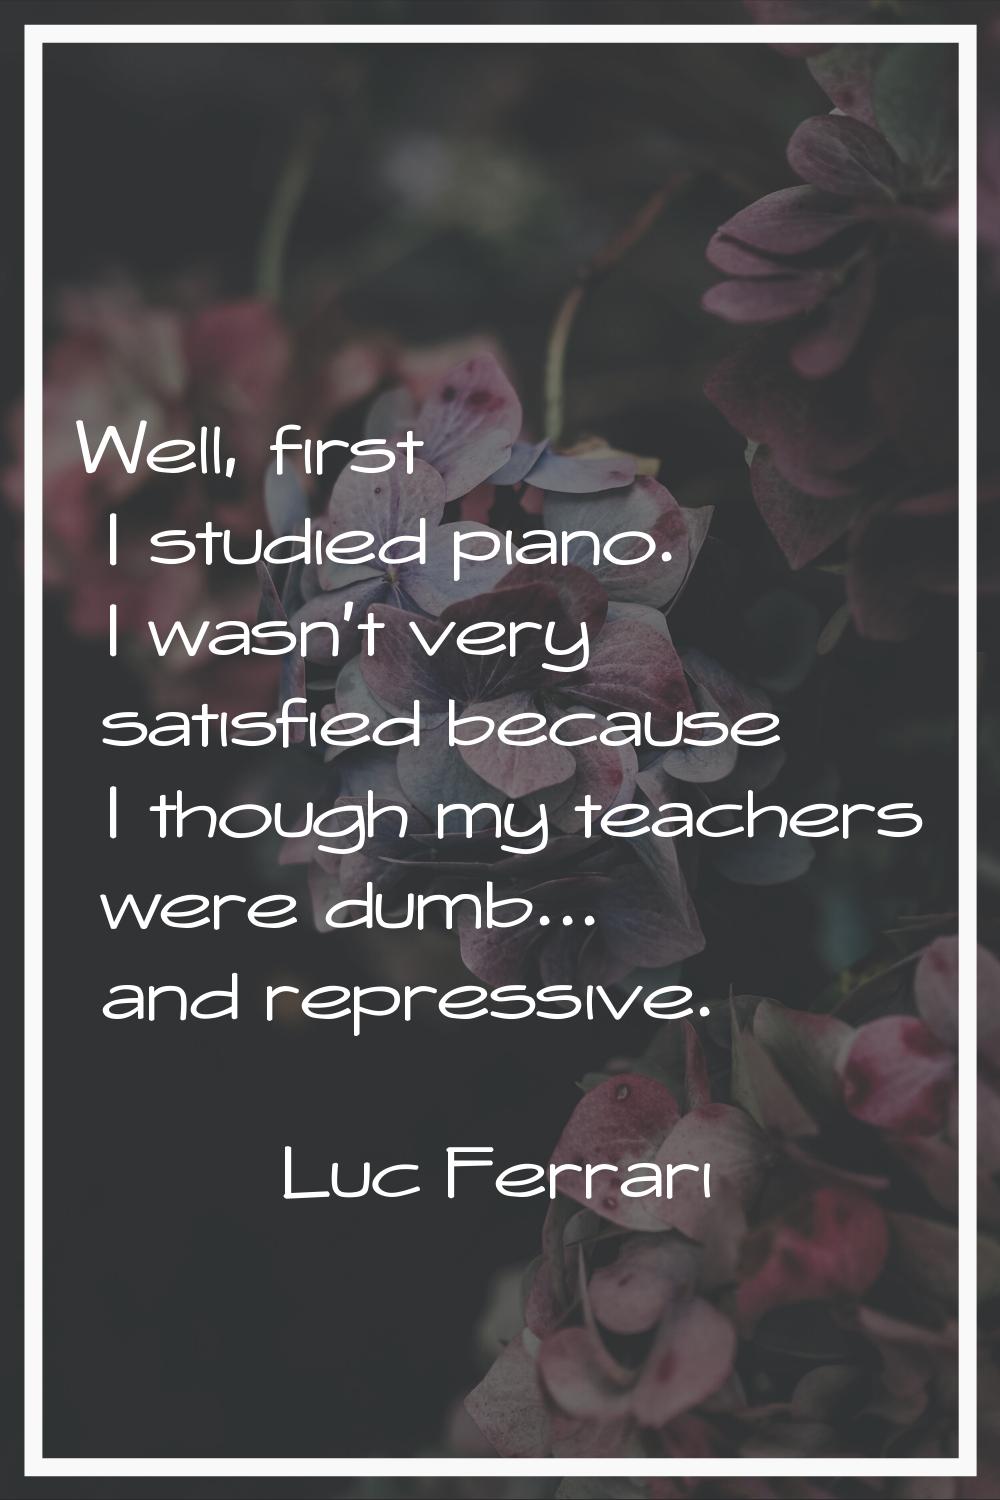 Well, first I studied piano. I wasn't very satisfied because I though my teachers were dumb... and 